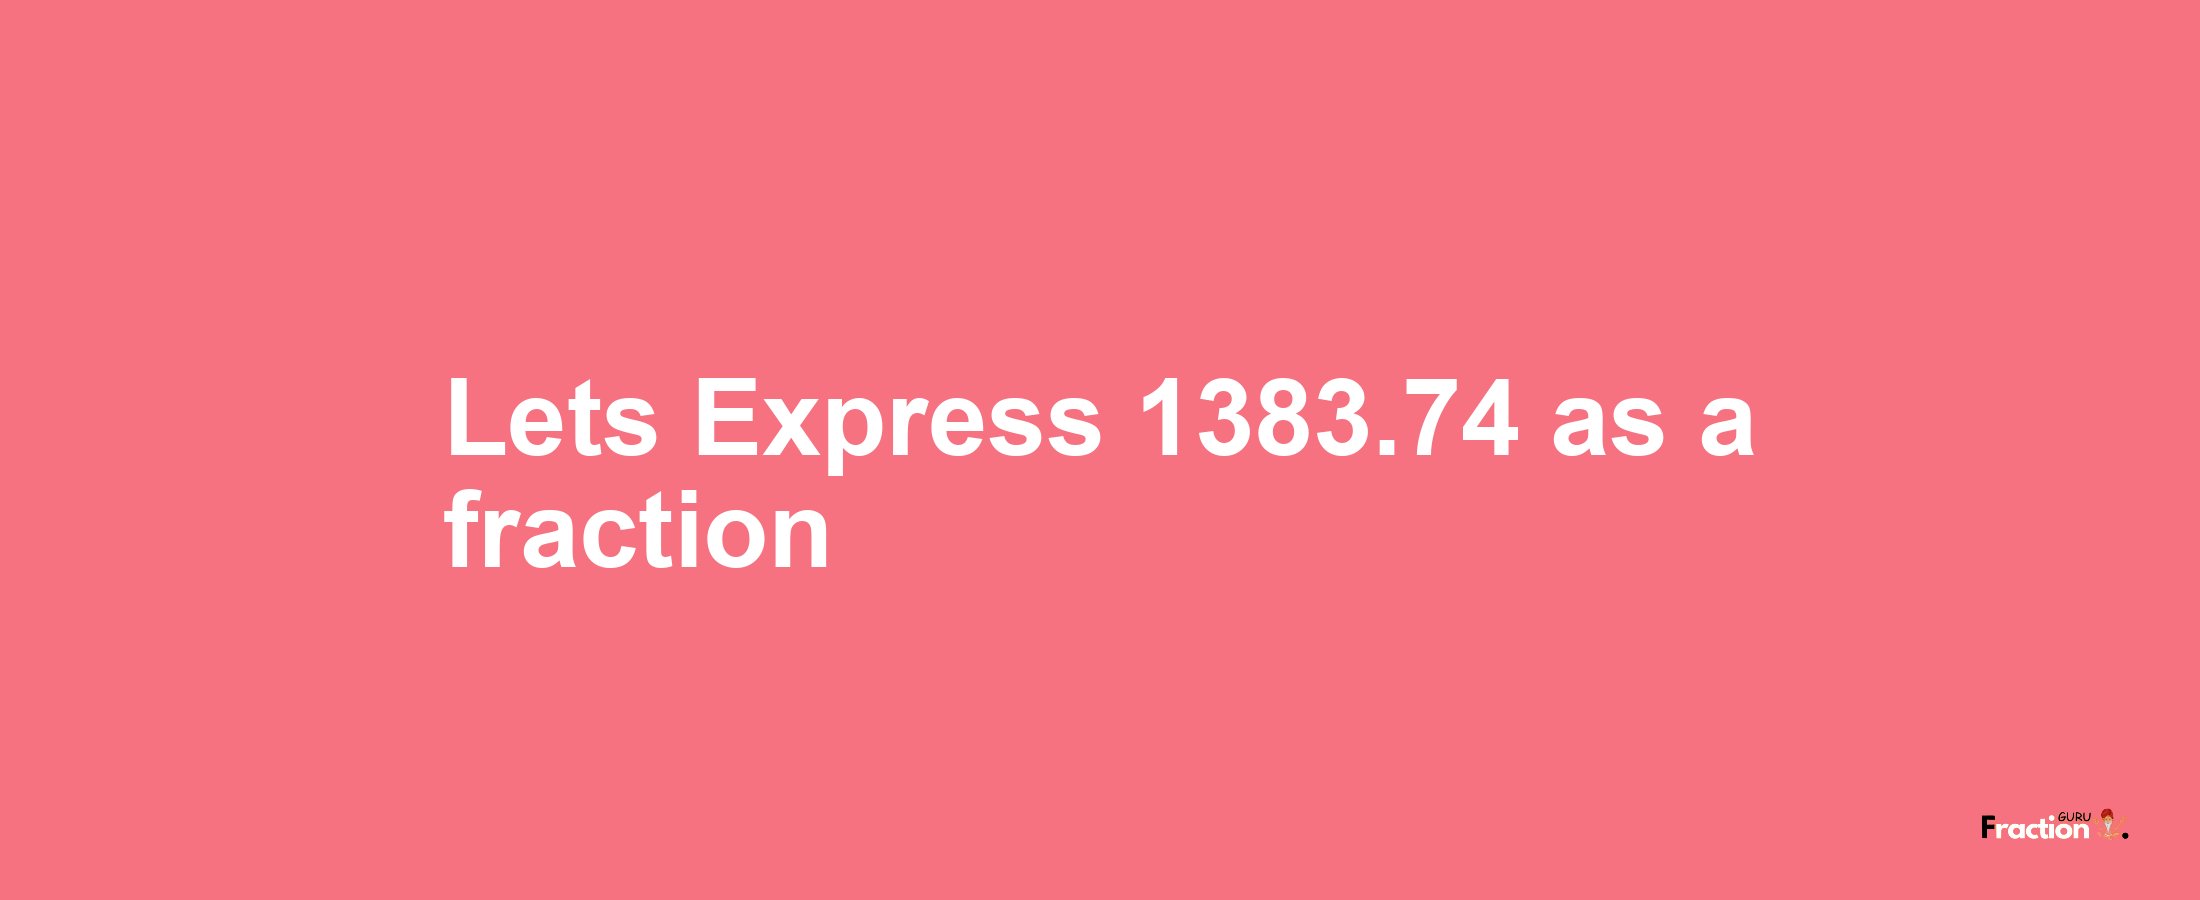 Lets Express 1383.74 as afraction